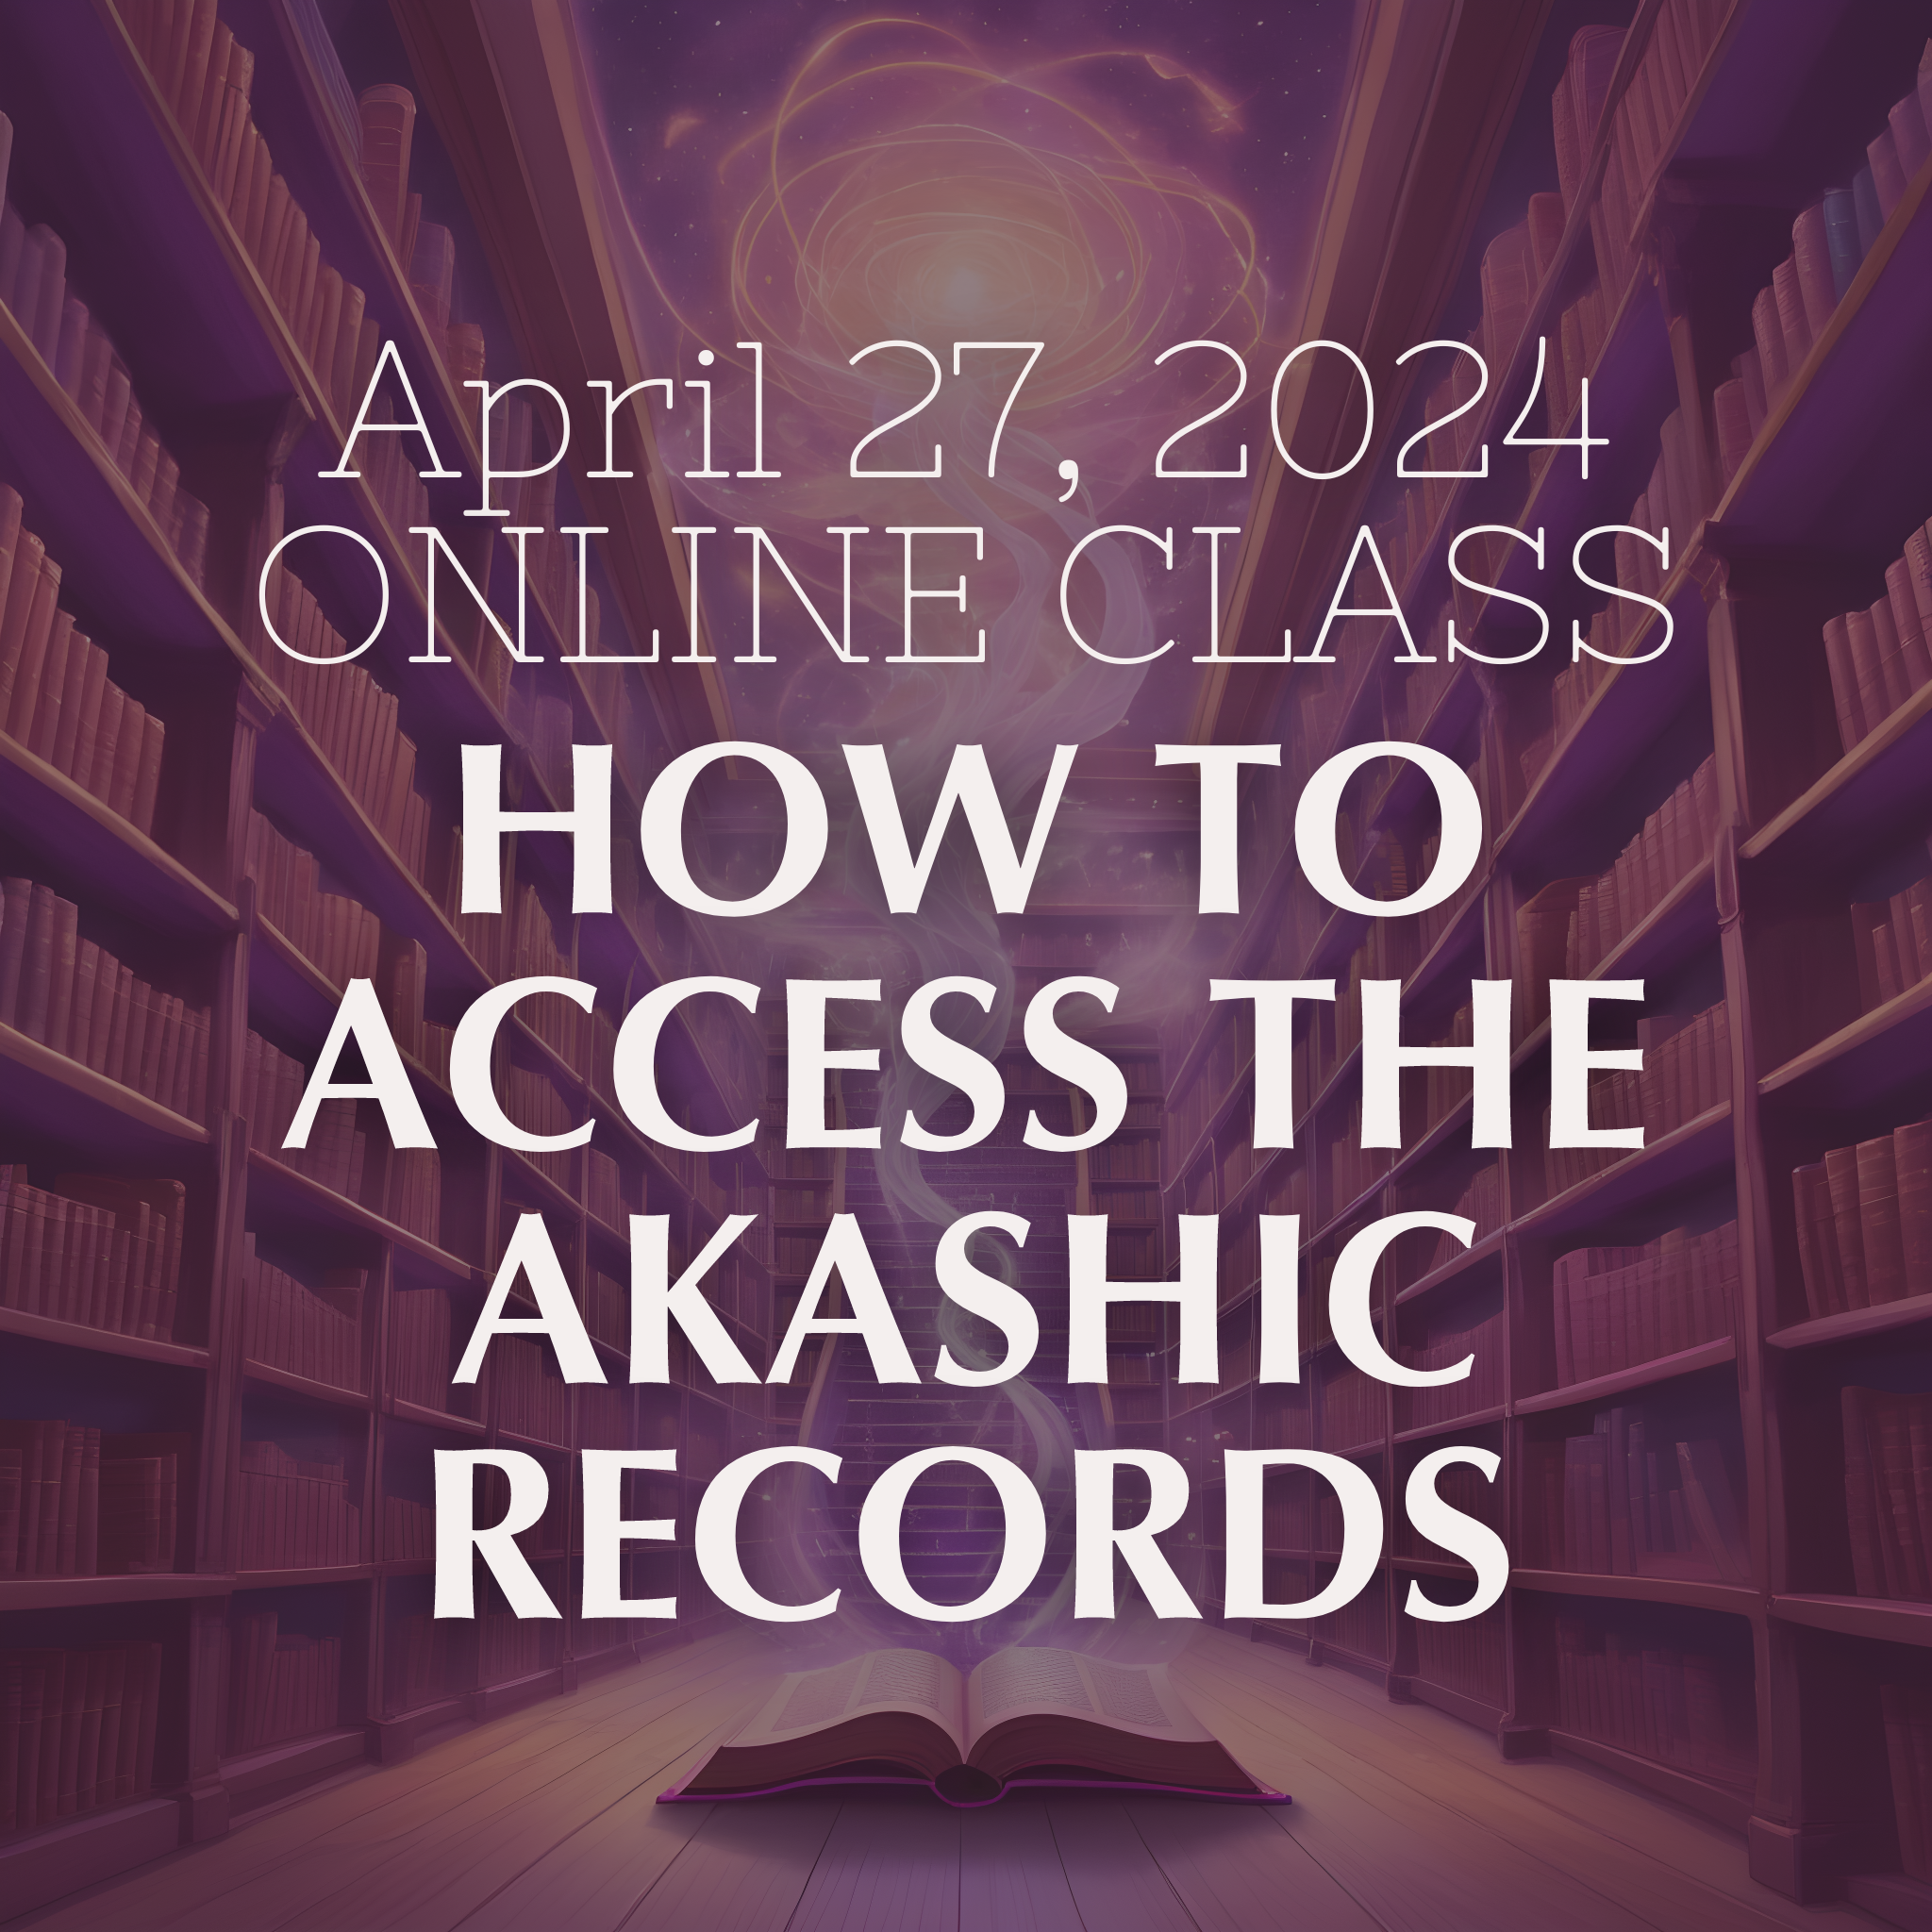 Akashic Records: Online Class (April 27, 2024)